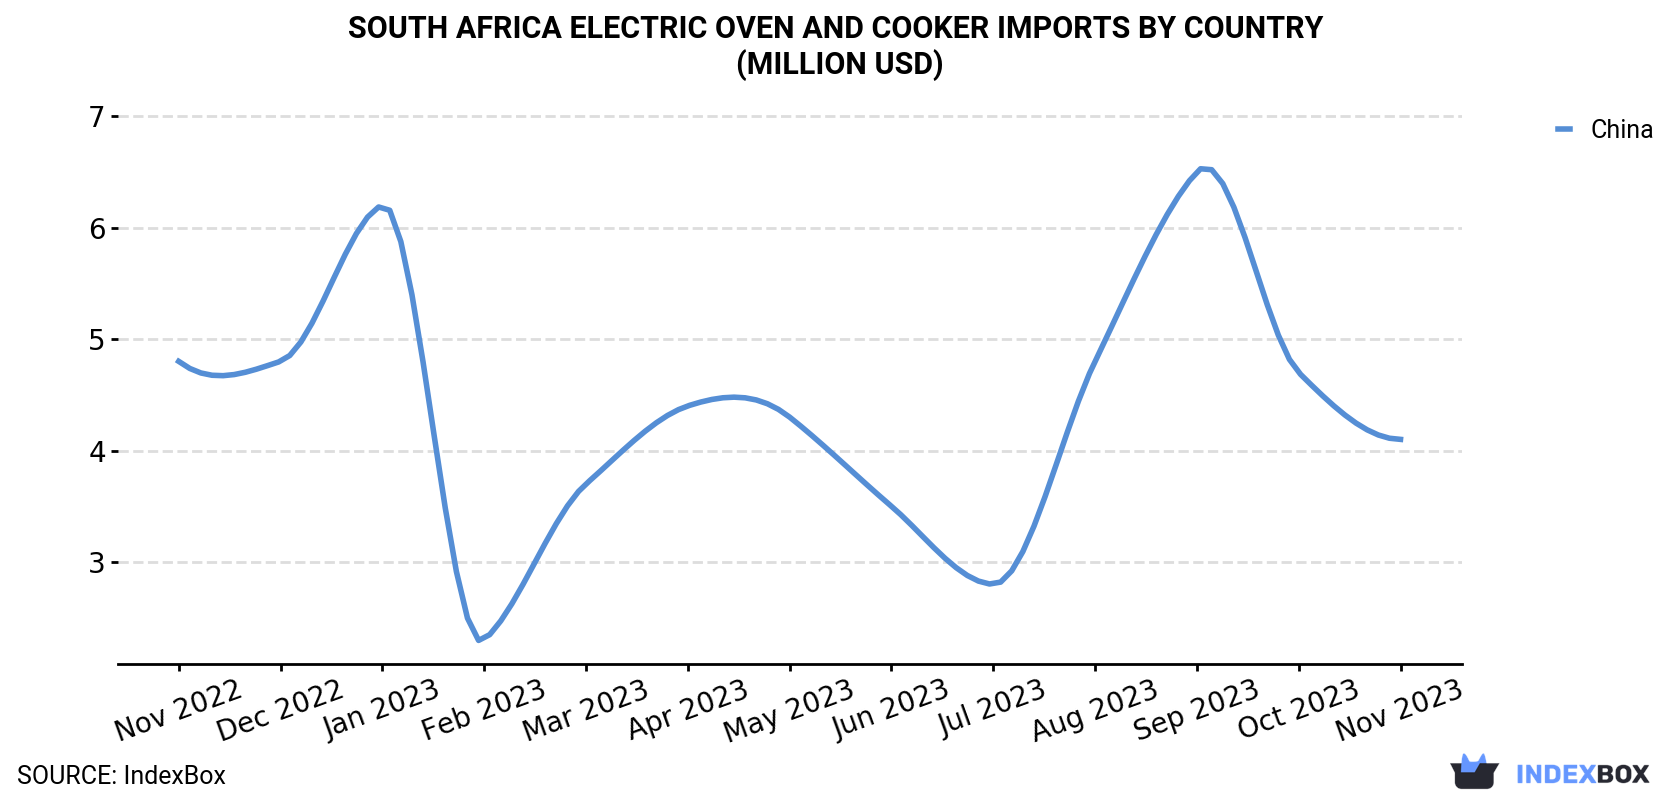 South Africa Electric Oven And Cooker Imports By Country (Million USD)